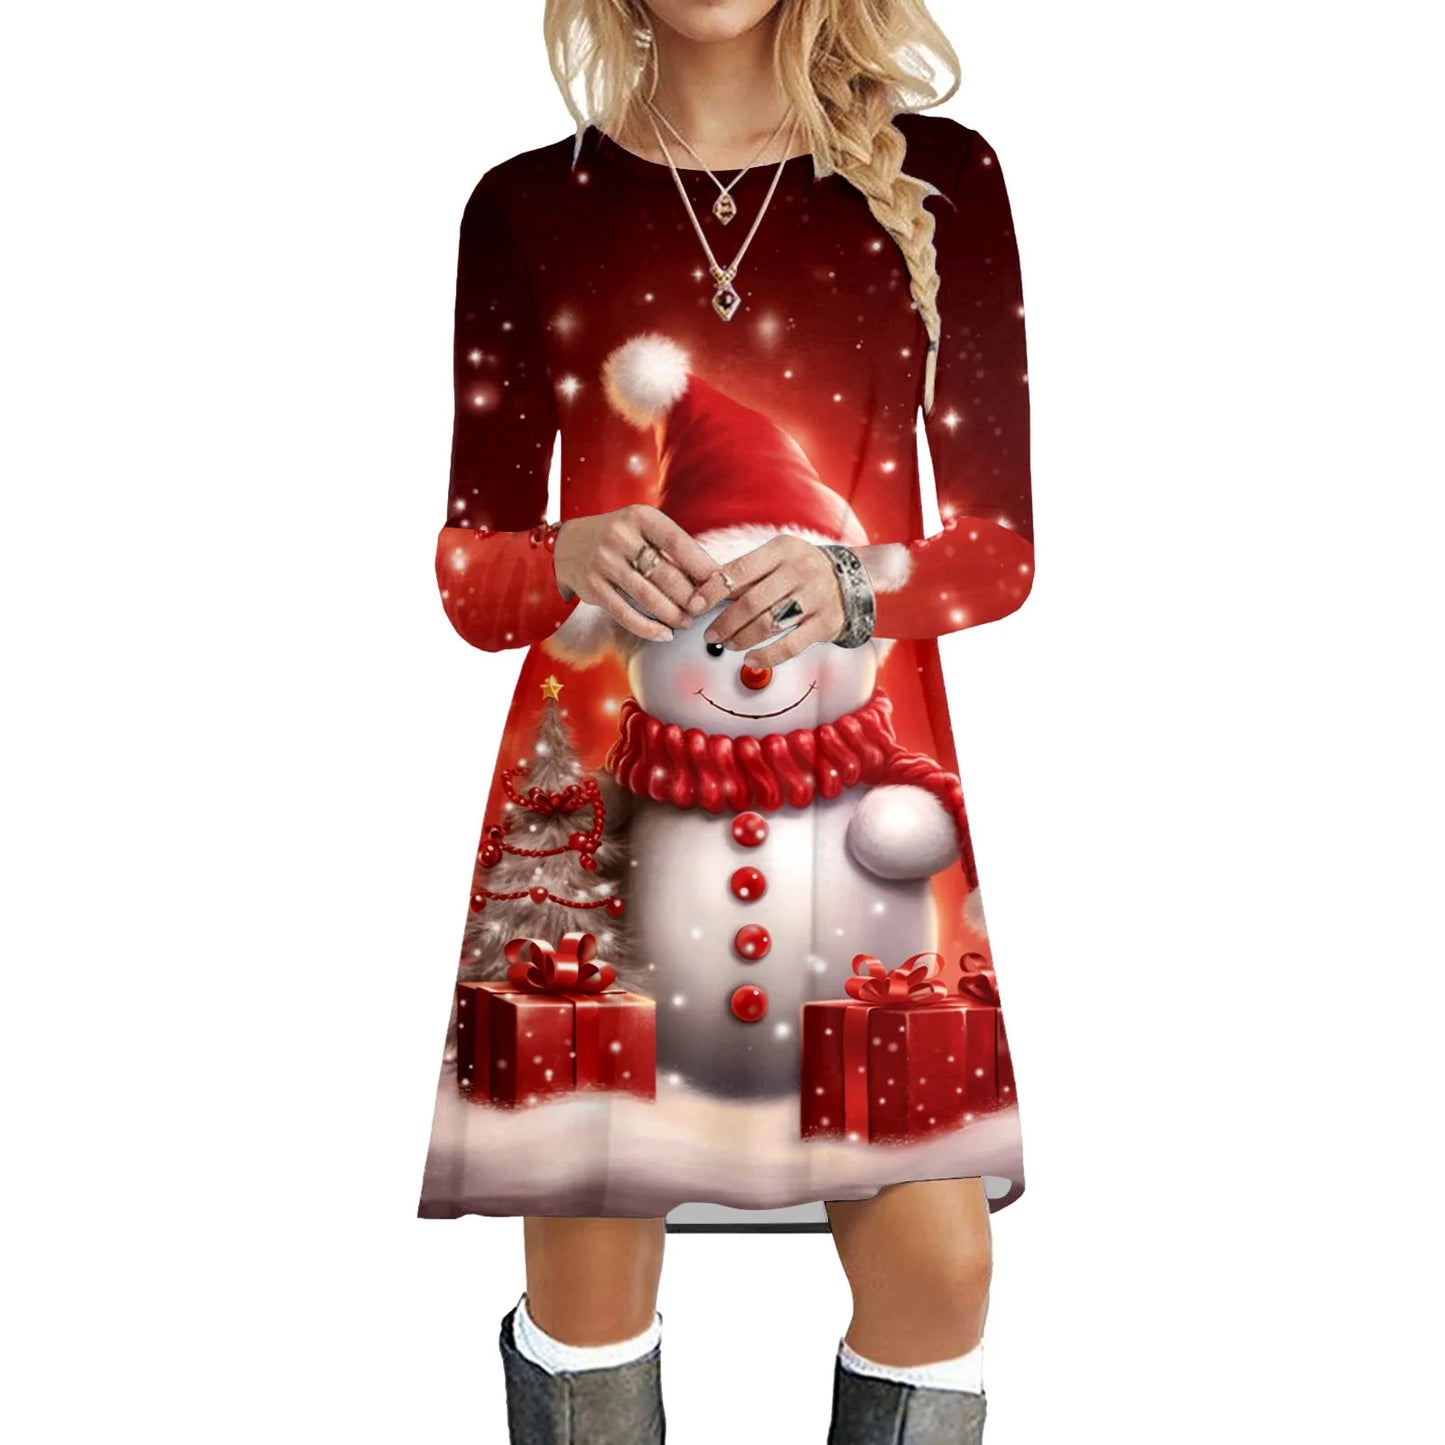 New Year Snowman Printed Hooded Dress Women's Long Sleeve Christmas Party Dress Oversized O Neck Casual Dress Femme Vestidos